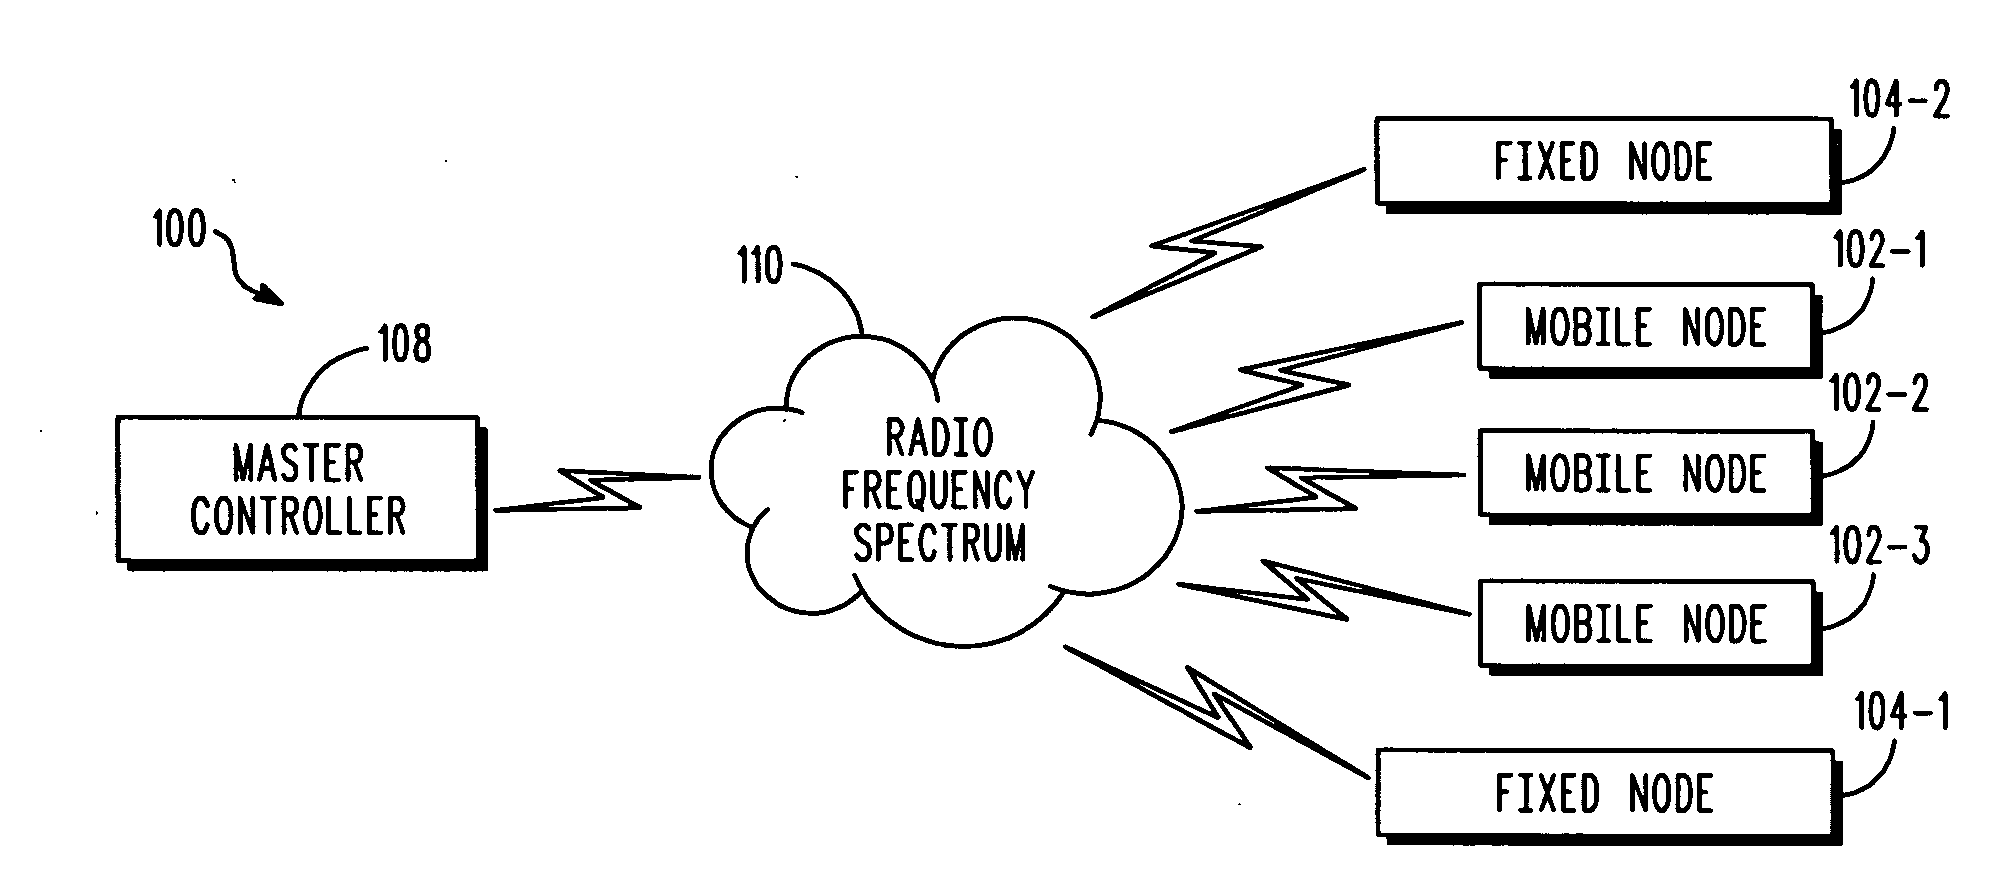 Method for multi-band communication routing within a wireless communication system